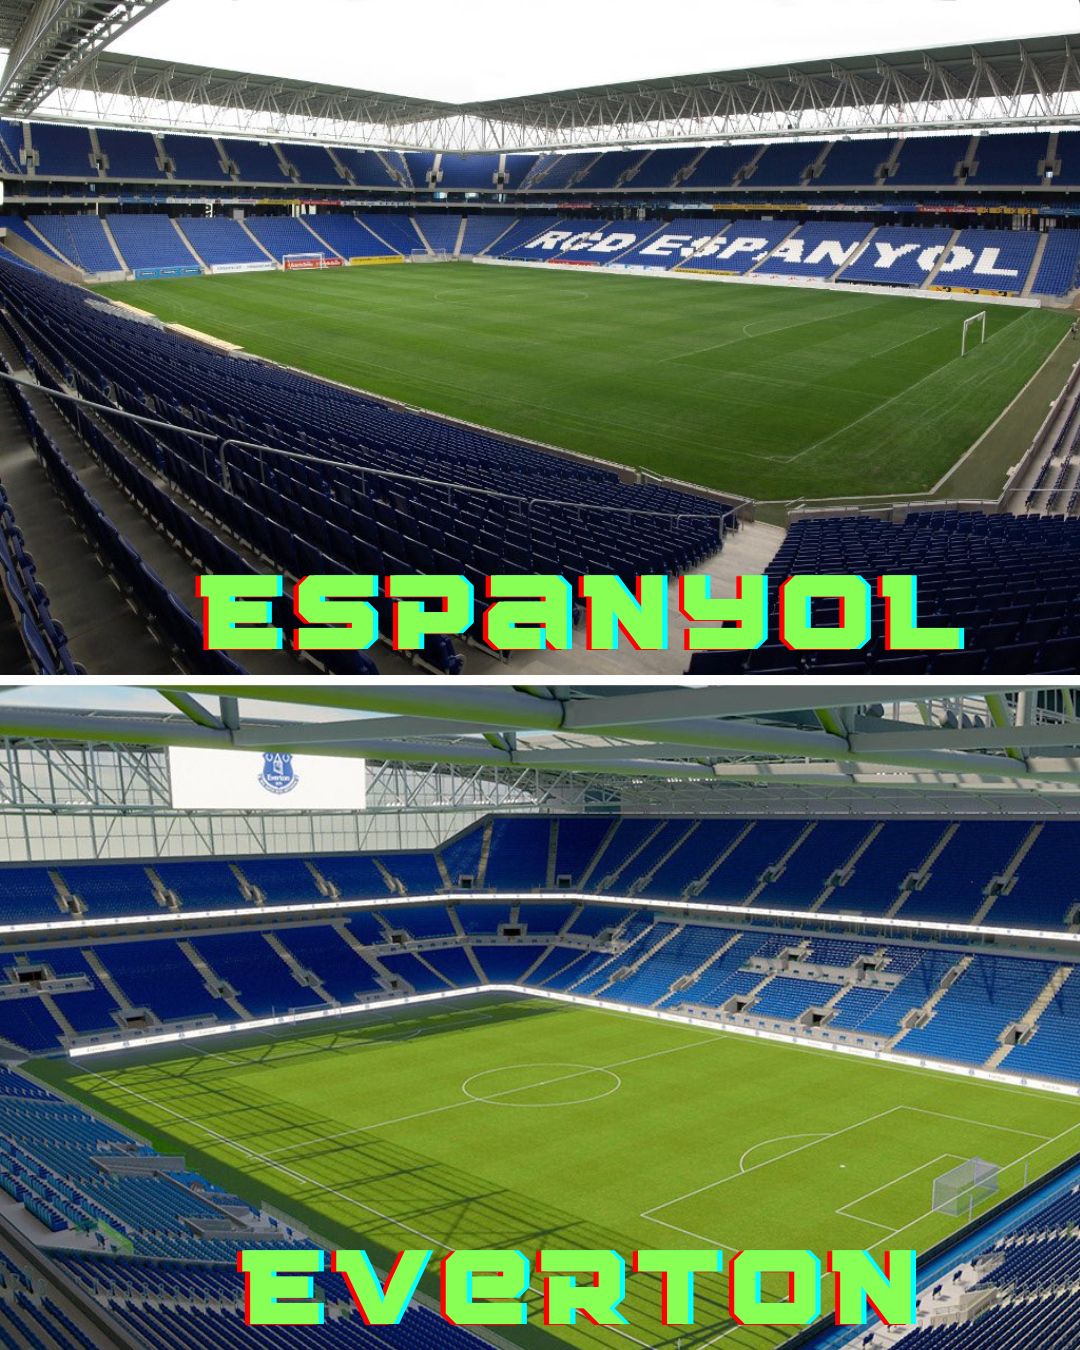 Inside Look at New Everton Stadium Fails to Impress Fans: ‘Two-Tiered Bowl’